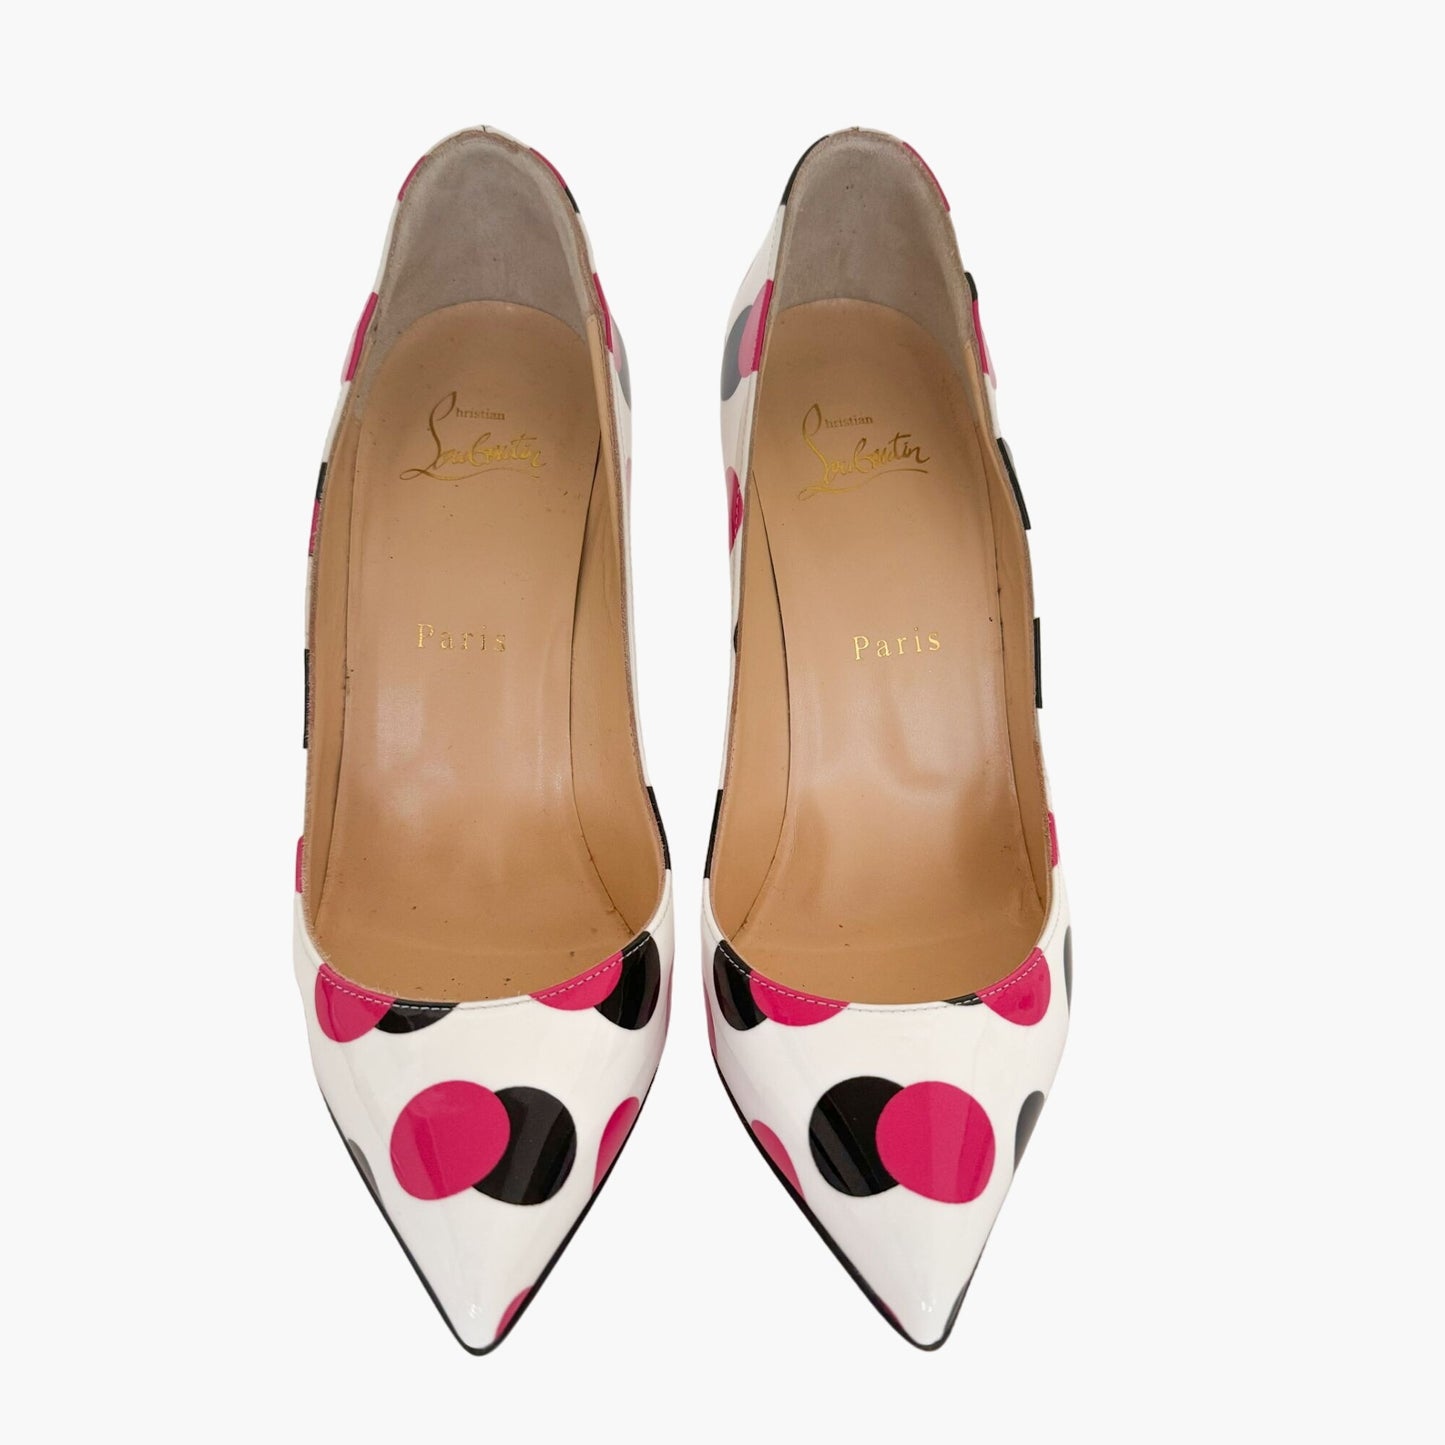 Christian Louboutin Pigalle Follies 100 Pumps in White Bangal-Rose Polka Dots Patent Leather Size 38